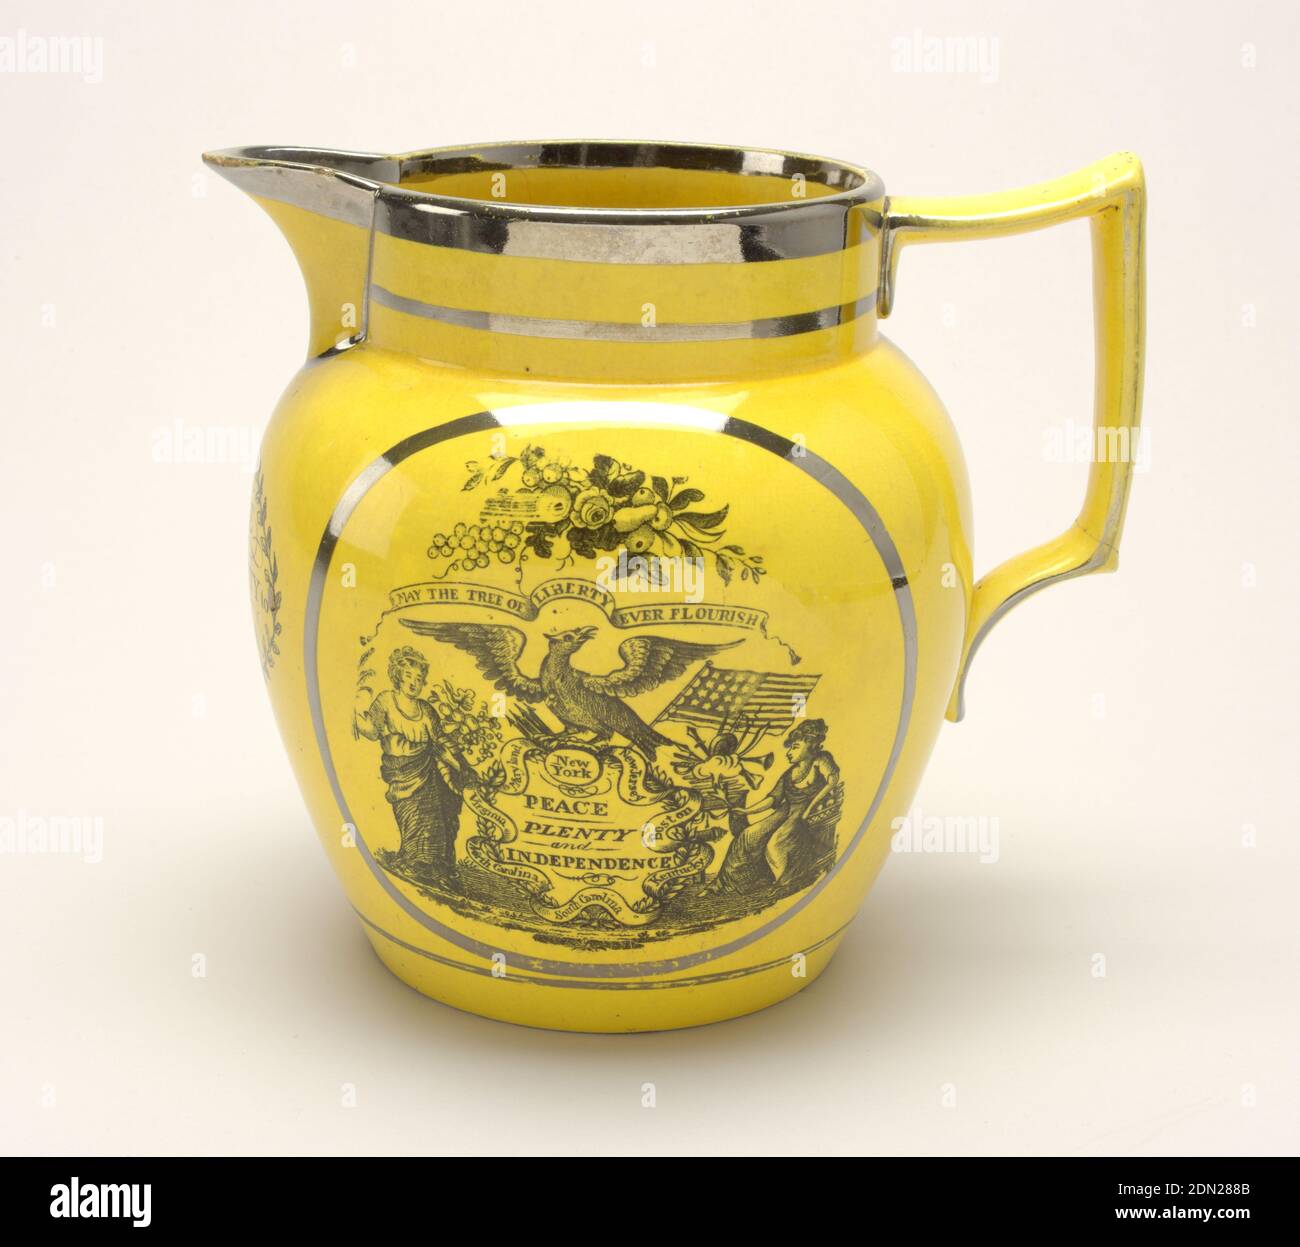 Pitcher, Glazed earthenware, silver resist, transfer printed and luster decoration, Tapering bulbous form with circular mouth and deep spout; large, squared loop handle. Yellow glaze ground with silver luster bands and black transfer-printed decoration: on one side, medalion with message, 'May The Tree of Liberty Ever Flourish,' accompanied by various symbols and attributes; on the opposite side, cartouche with message 'Success to the United States of America,' accompanied by symbols and attributes, and surmounting ribbon with 'E Pluribus Unum'; under spout, 'Peace and Prosperity to America Stock Photo